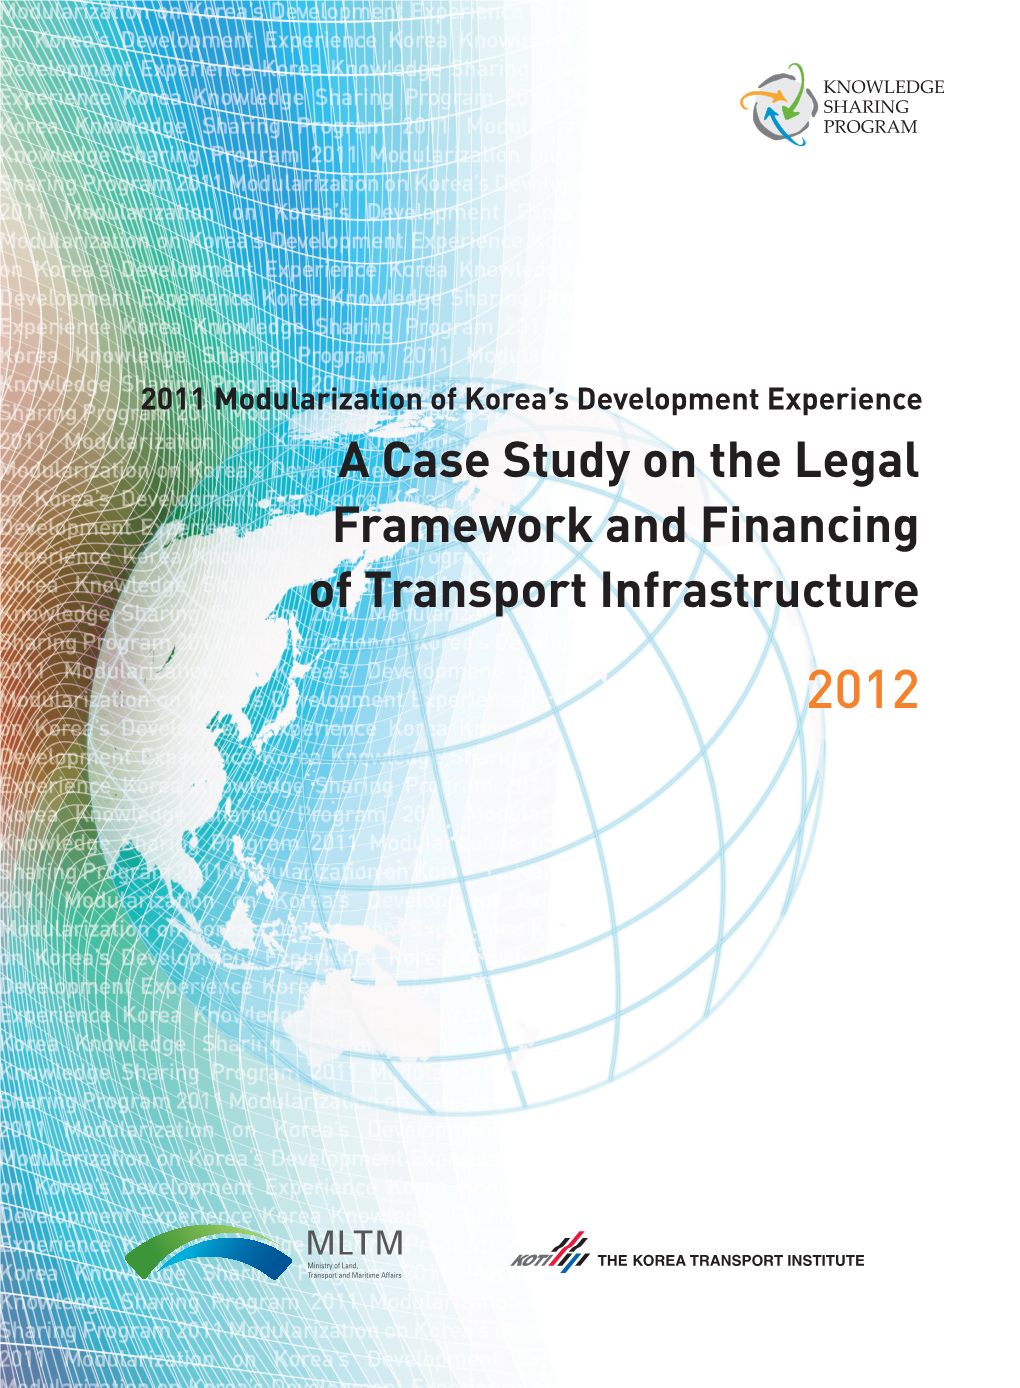 A Case Study on the Legal Framework and Financing of Transport Infrastructure 2012